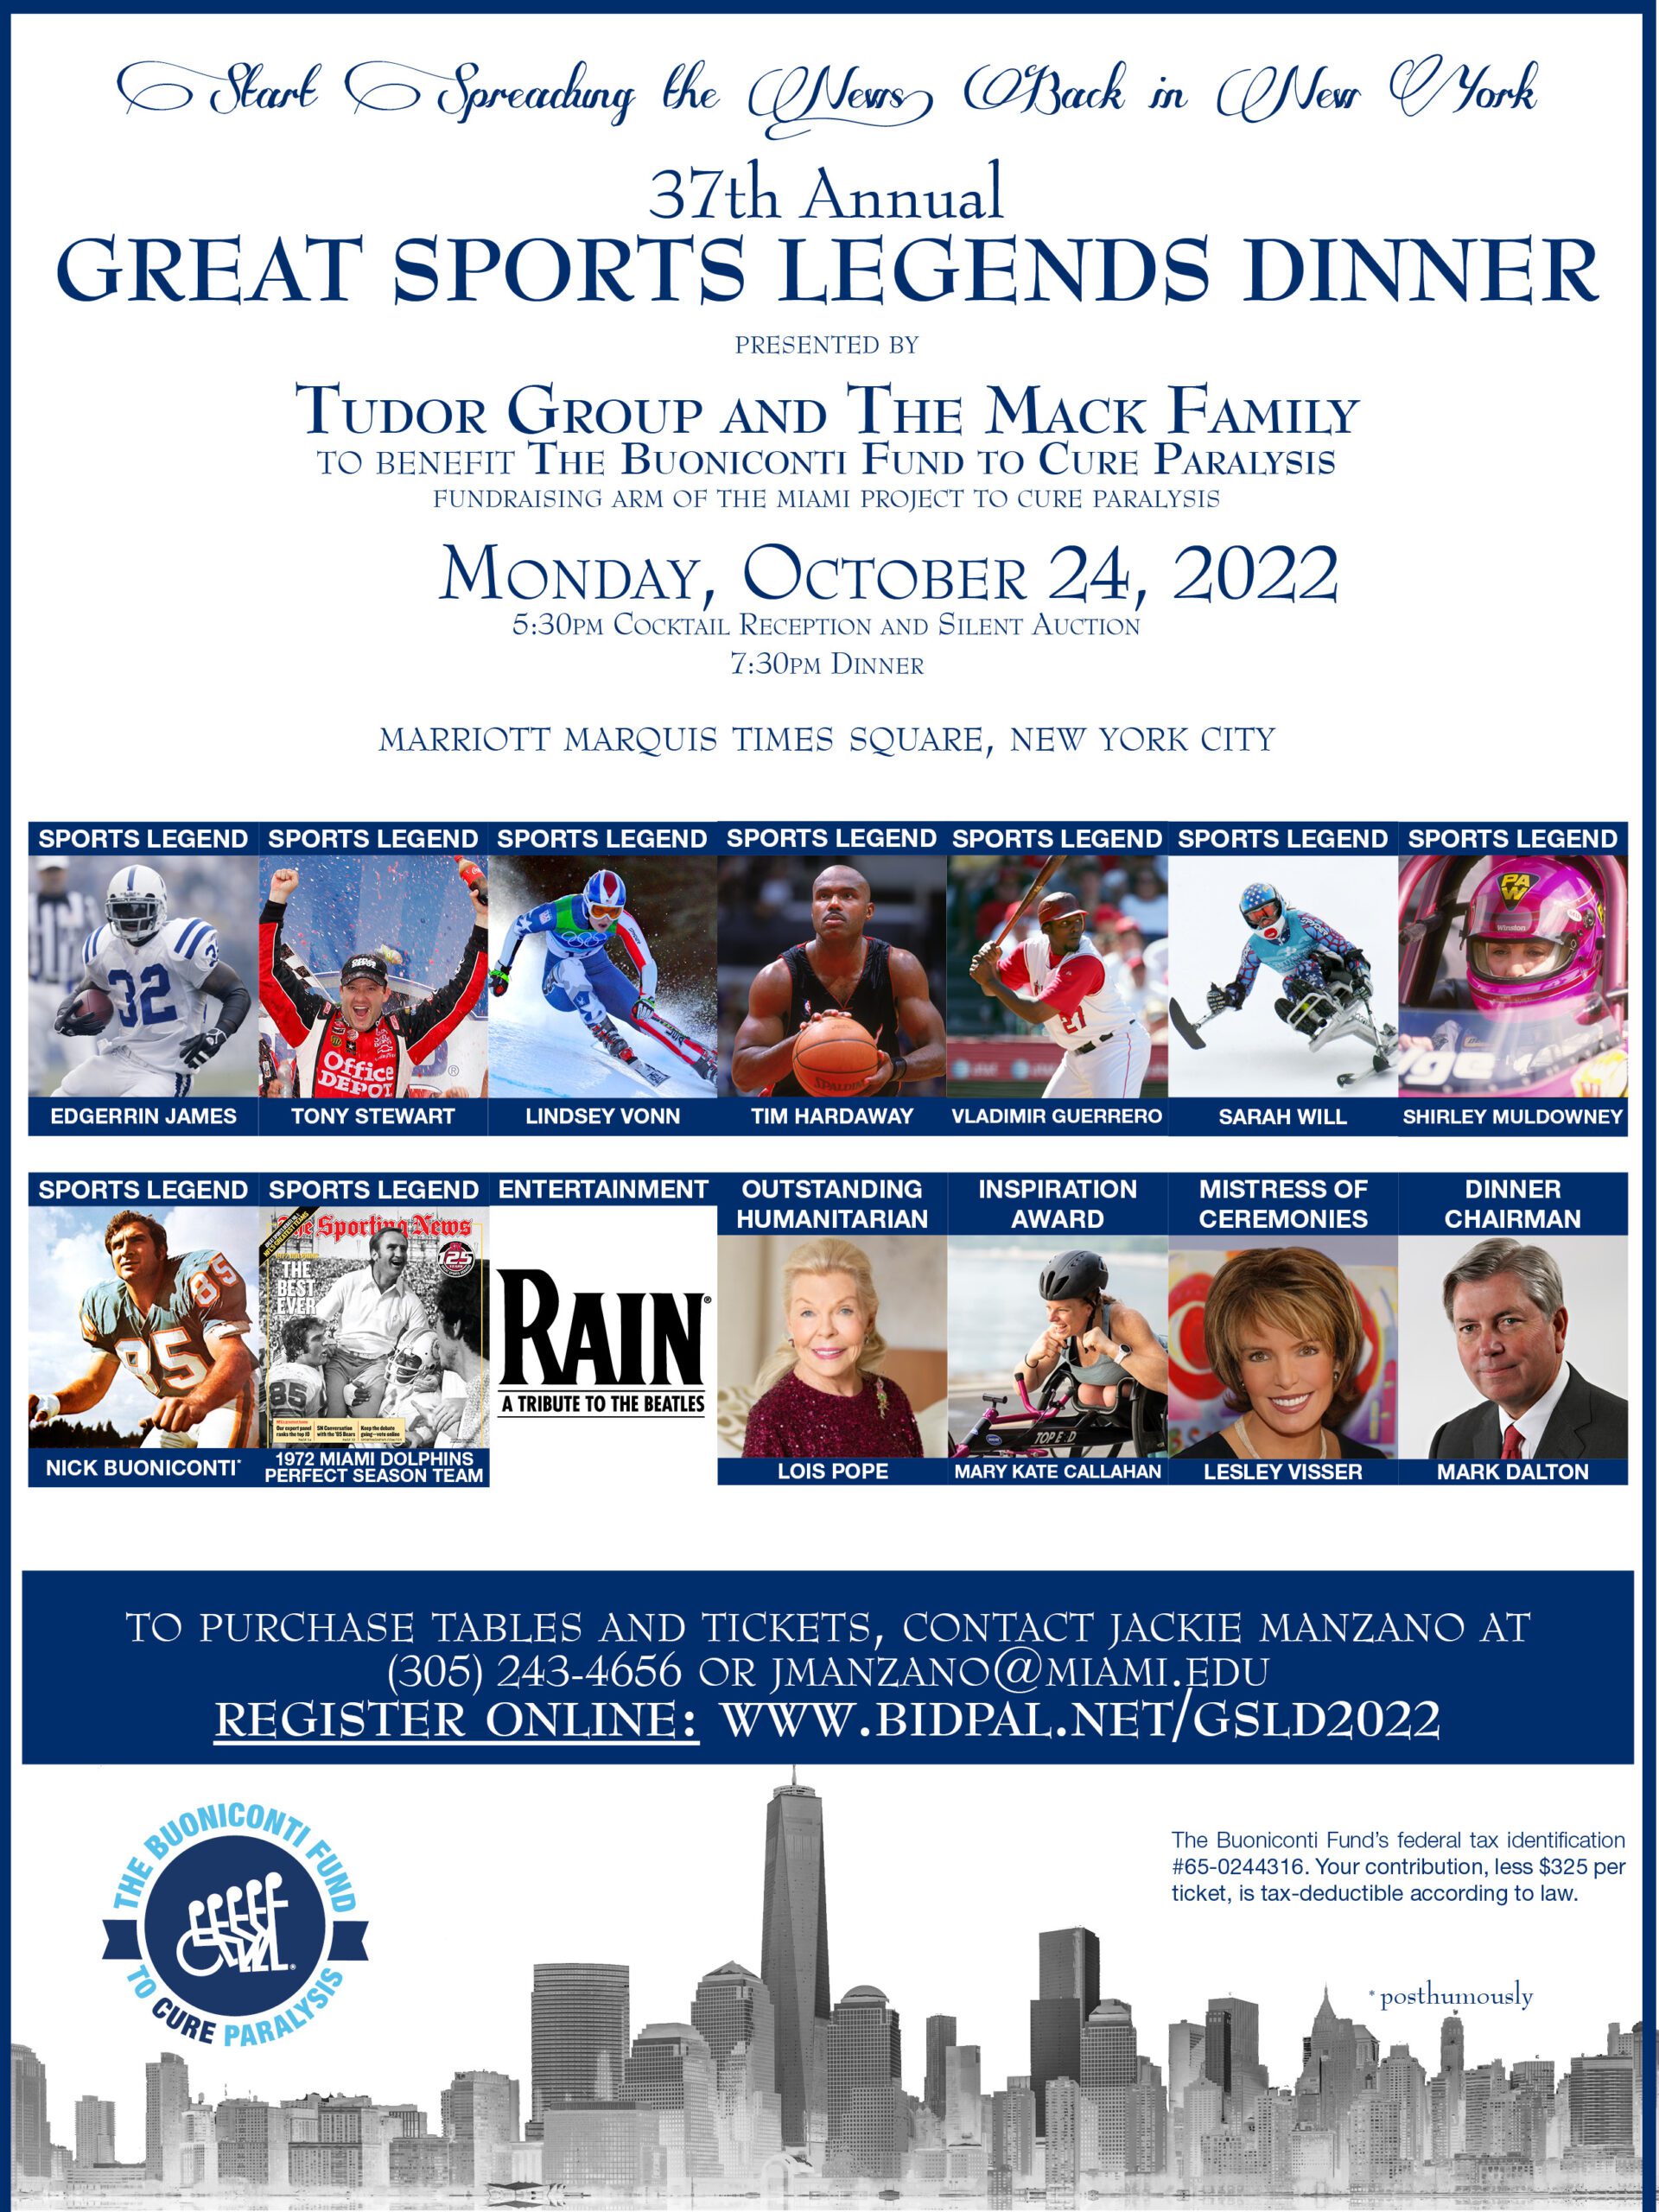 37th Annual Great Sports Legends Dinner The Miami Project